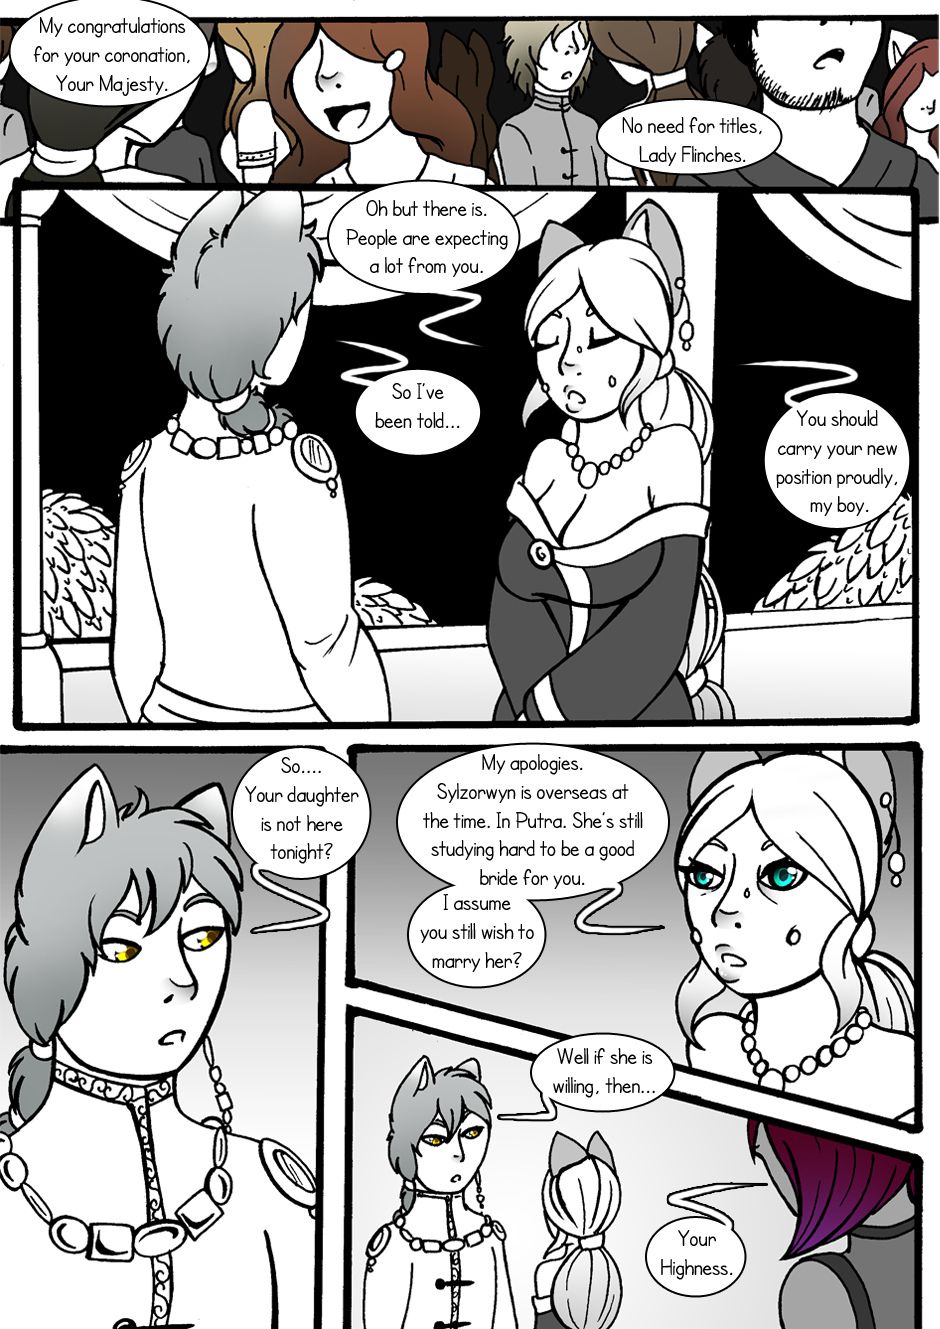 [Jeny-jen94] Between Kings and Queens [Ongoing] 23